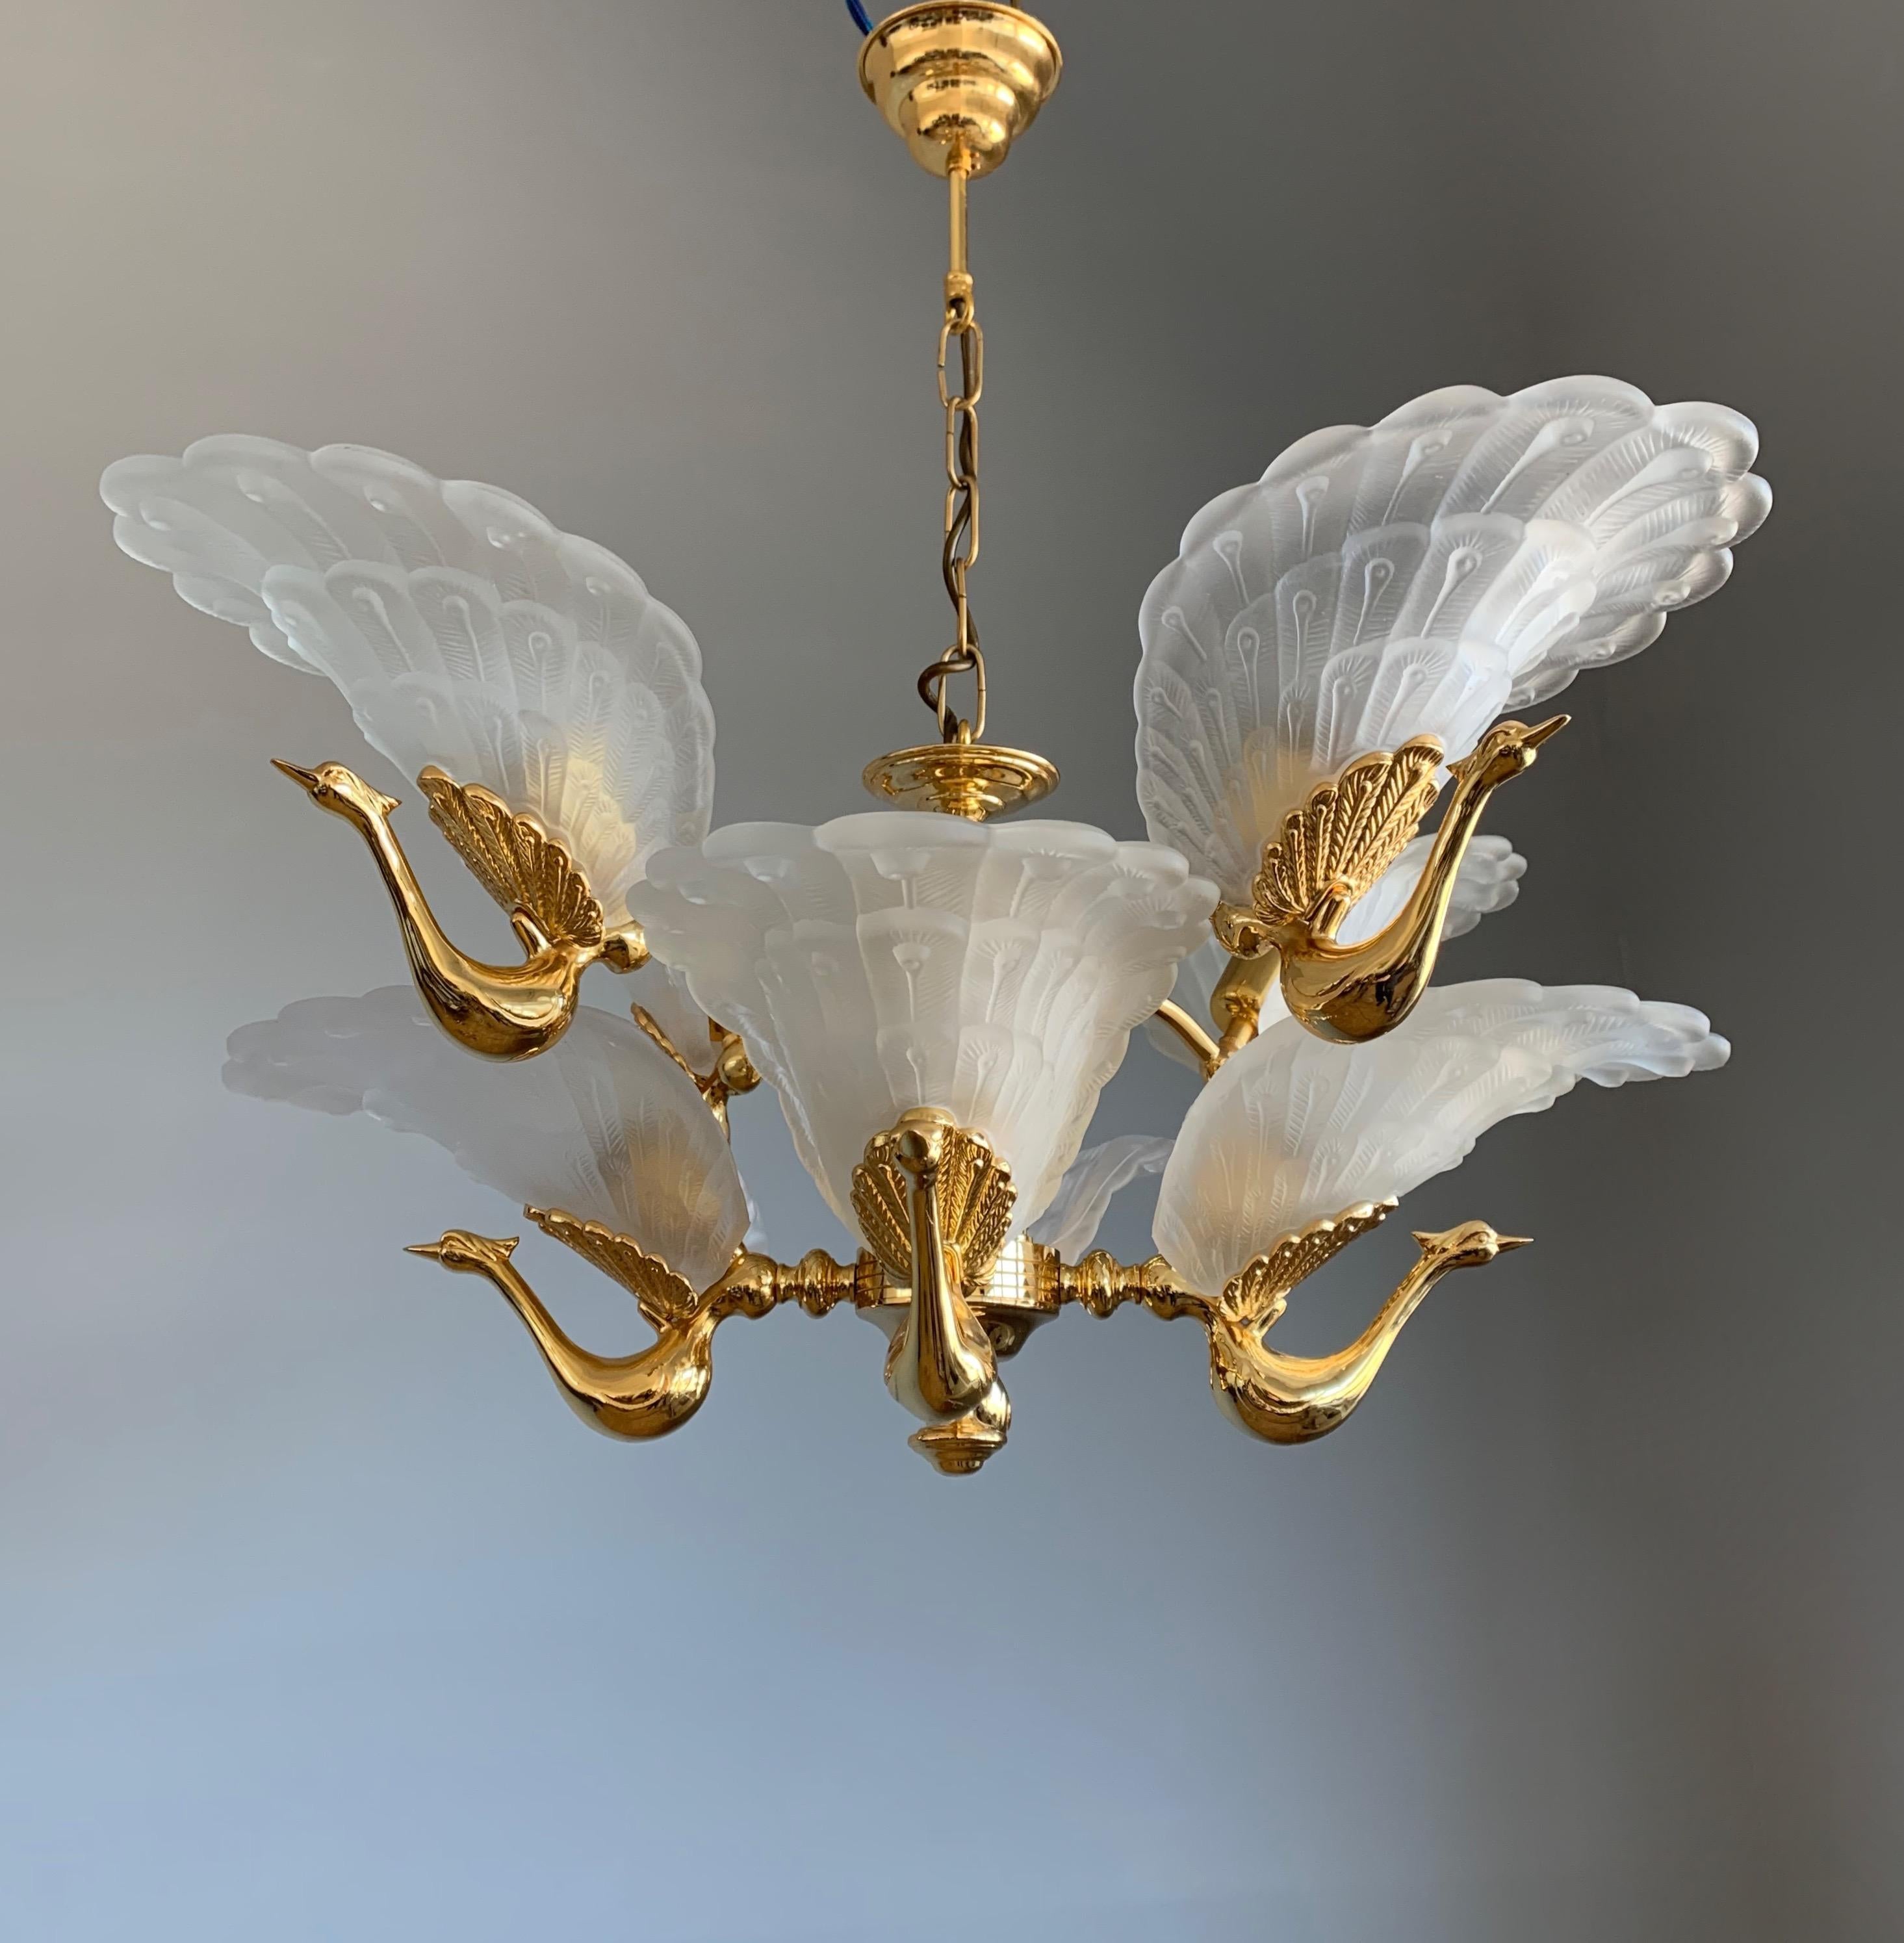 Sculptural and highly decorative two-tiers eight light fixture.

The peacock has, since ancient times, been regarded as an animal with many positive and even healing characteristics. And that has inspired many artist and designers through all times